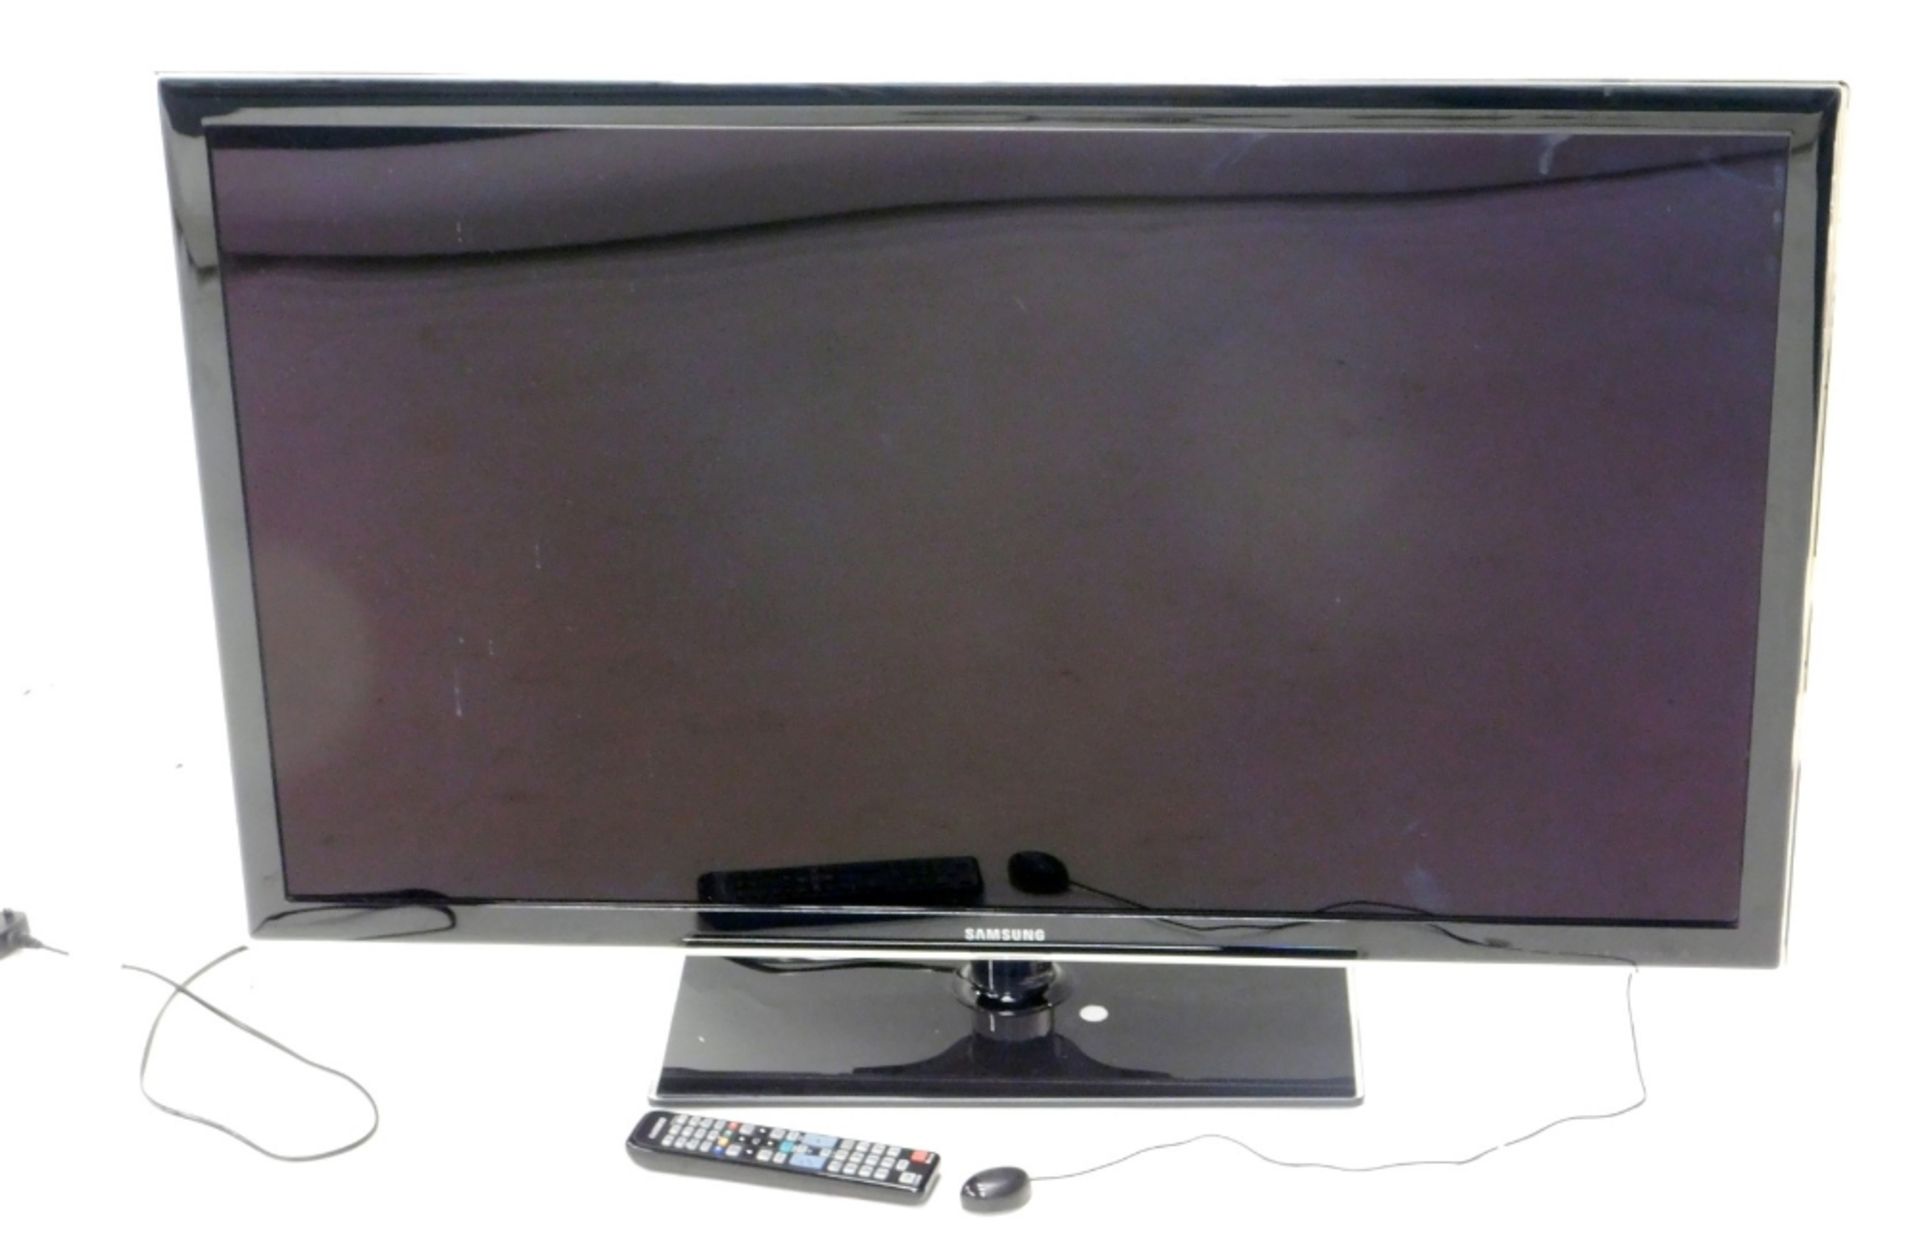 A Samsung UE46D5320 42" flat screen television, on stand, with remote control and wire.